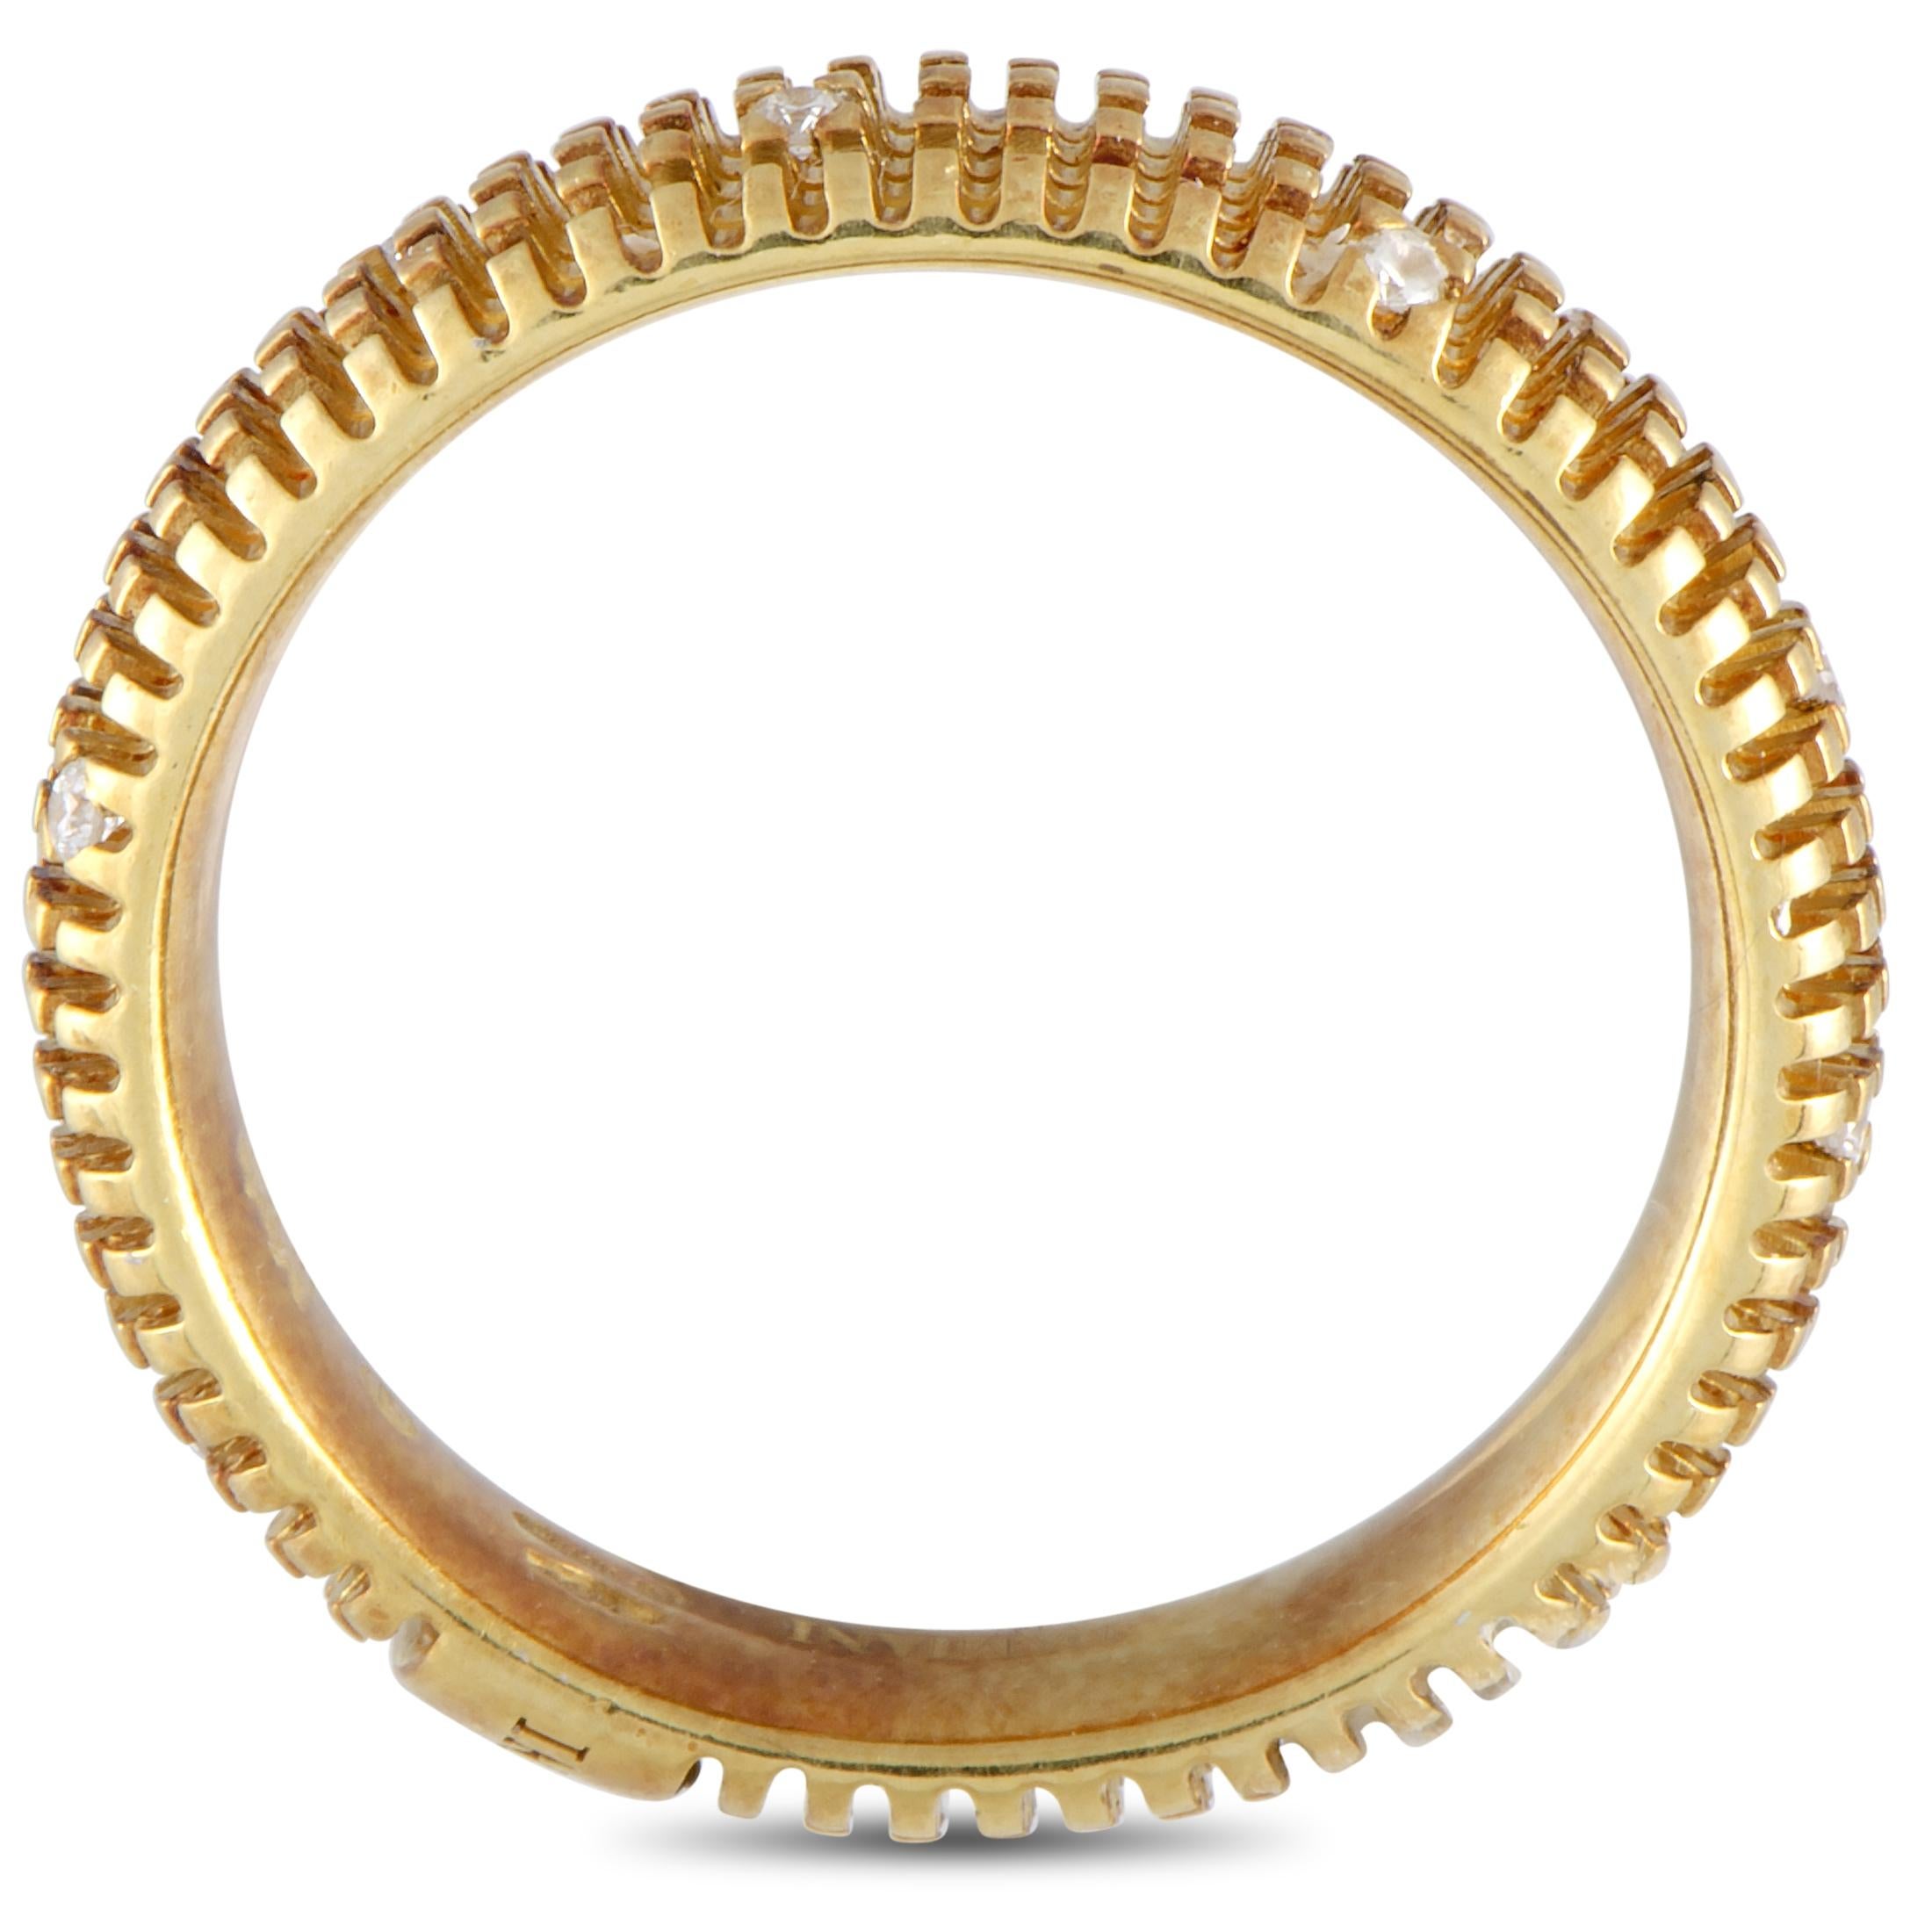 The Damiani “Metropolitan” band ring is made out of 18K yellow gold and diamonds that weigh 0.07 carats in total. The ring boasts band thickness of 5 mm, and weighs 4.9 grams.
 
 This item is offered in brand new condition and includes the